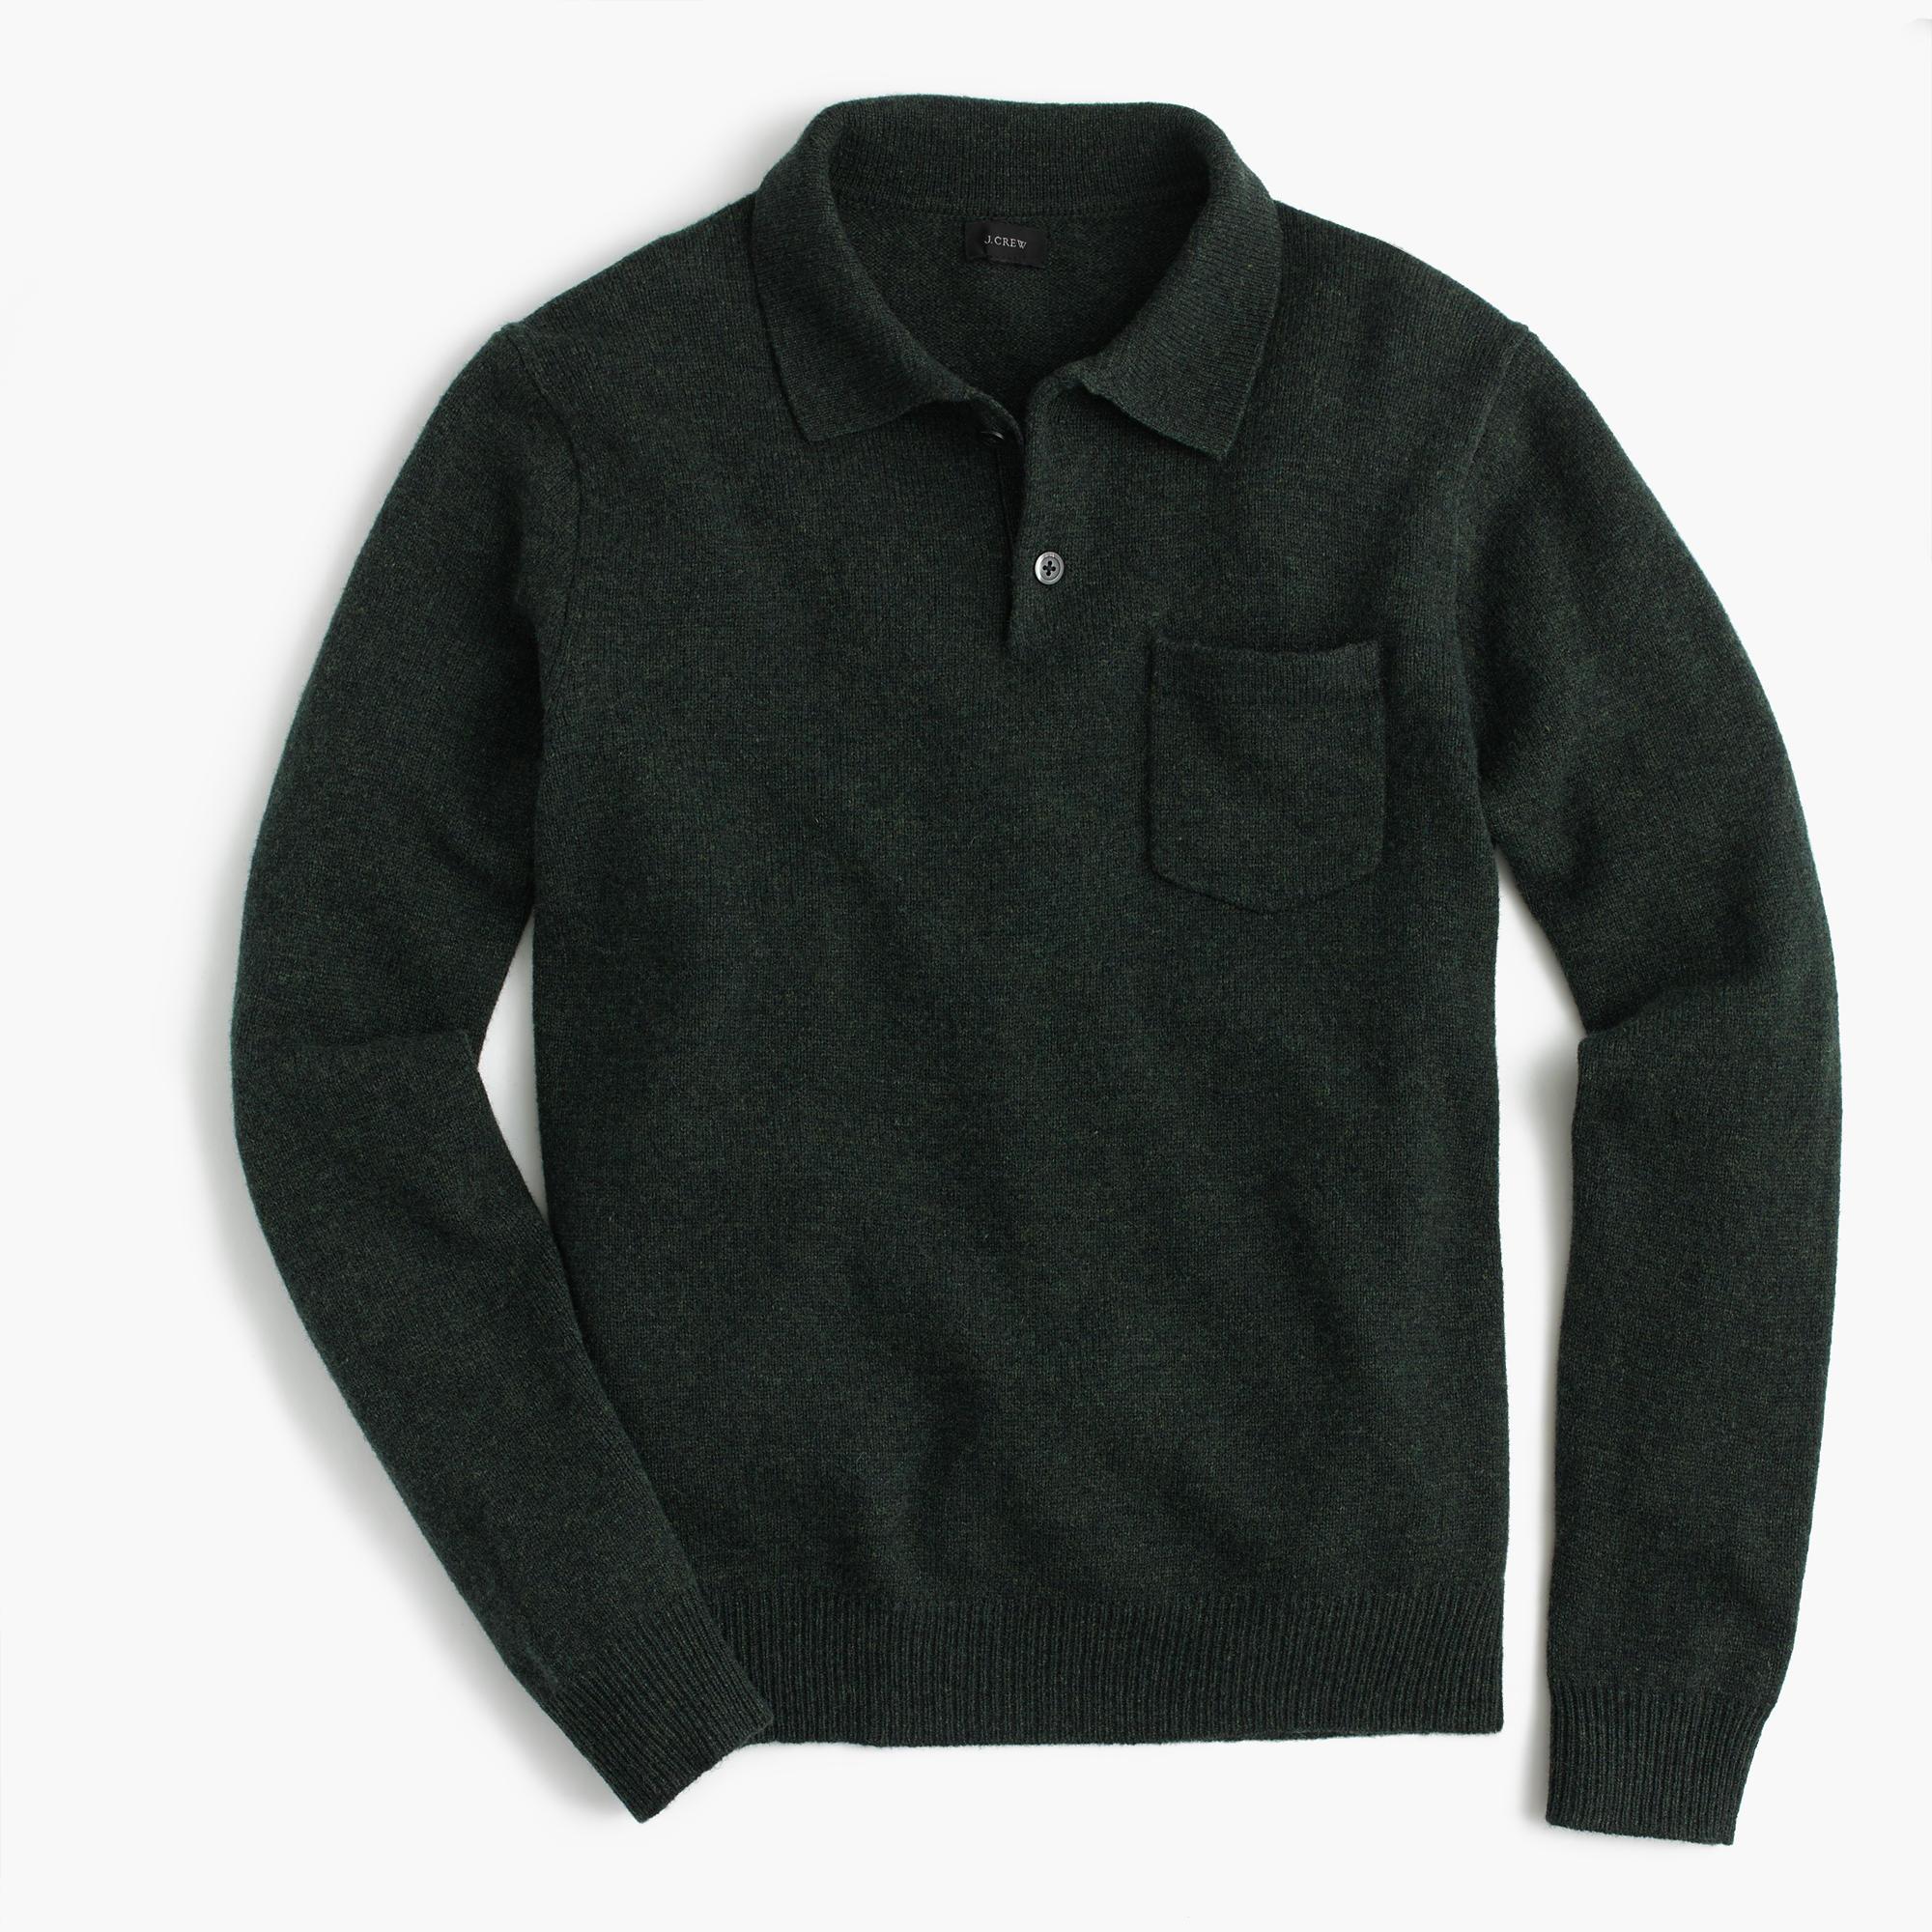 J.Crew Lambswool Long-sleeve Polo Sweater in Green for Men - Lyst